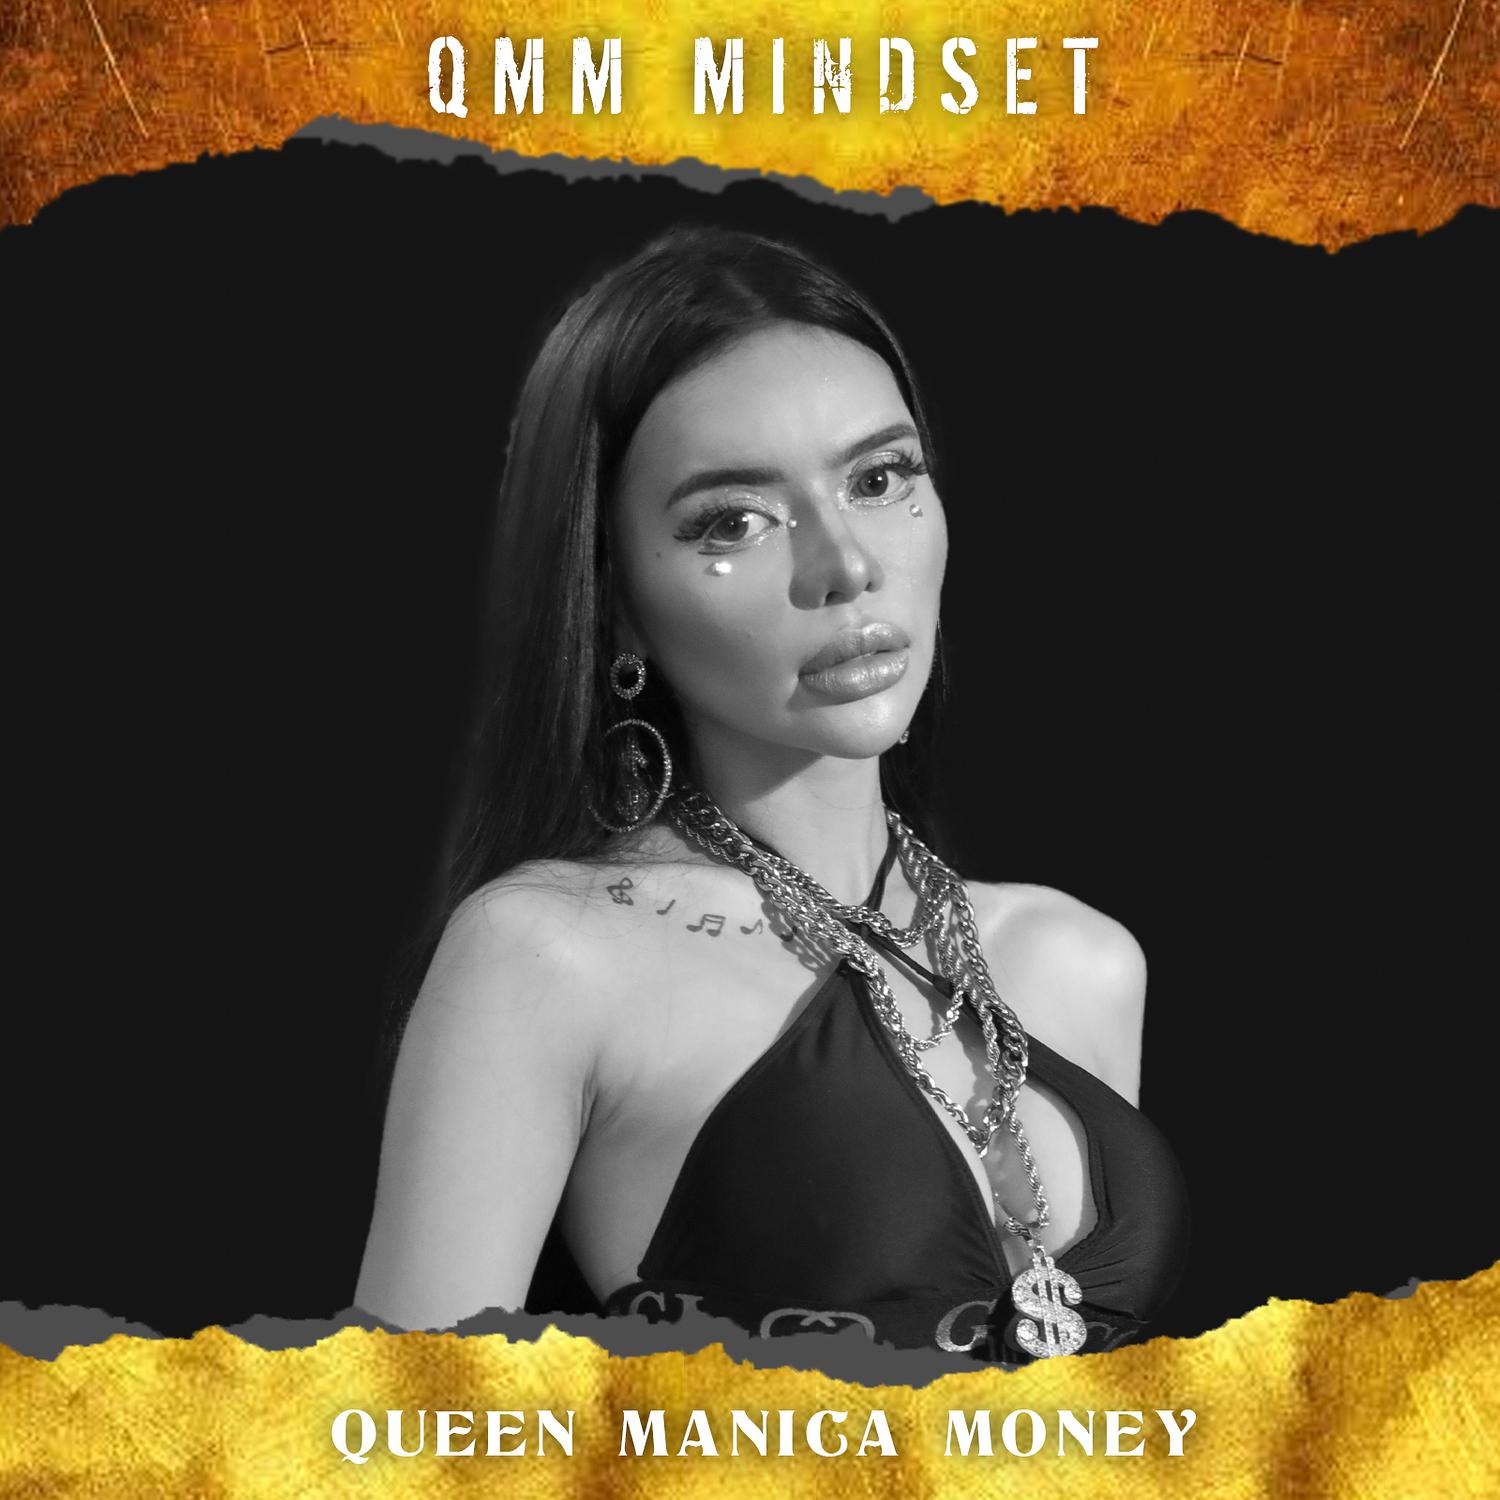 Queen Manica Money - Ikaw at Ako